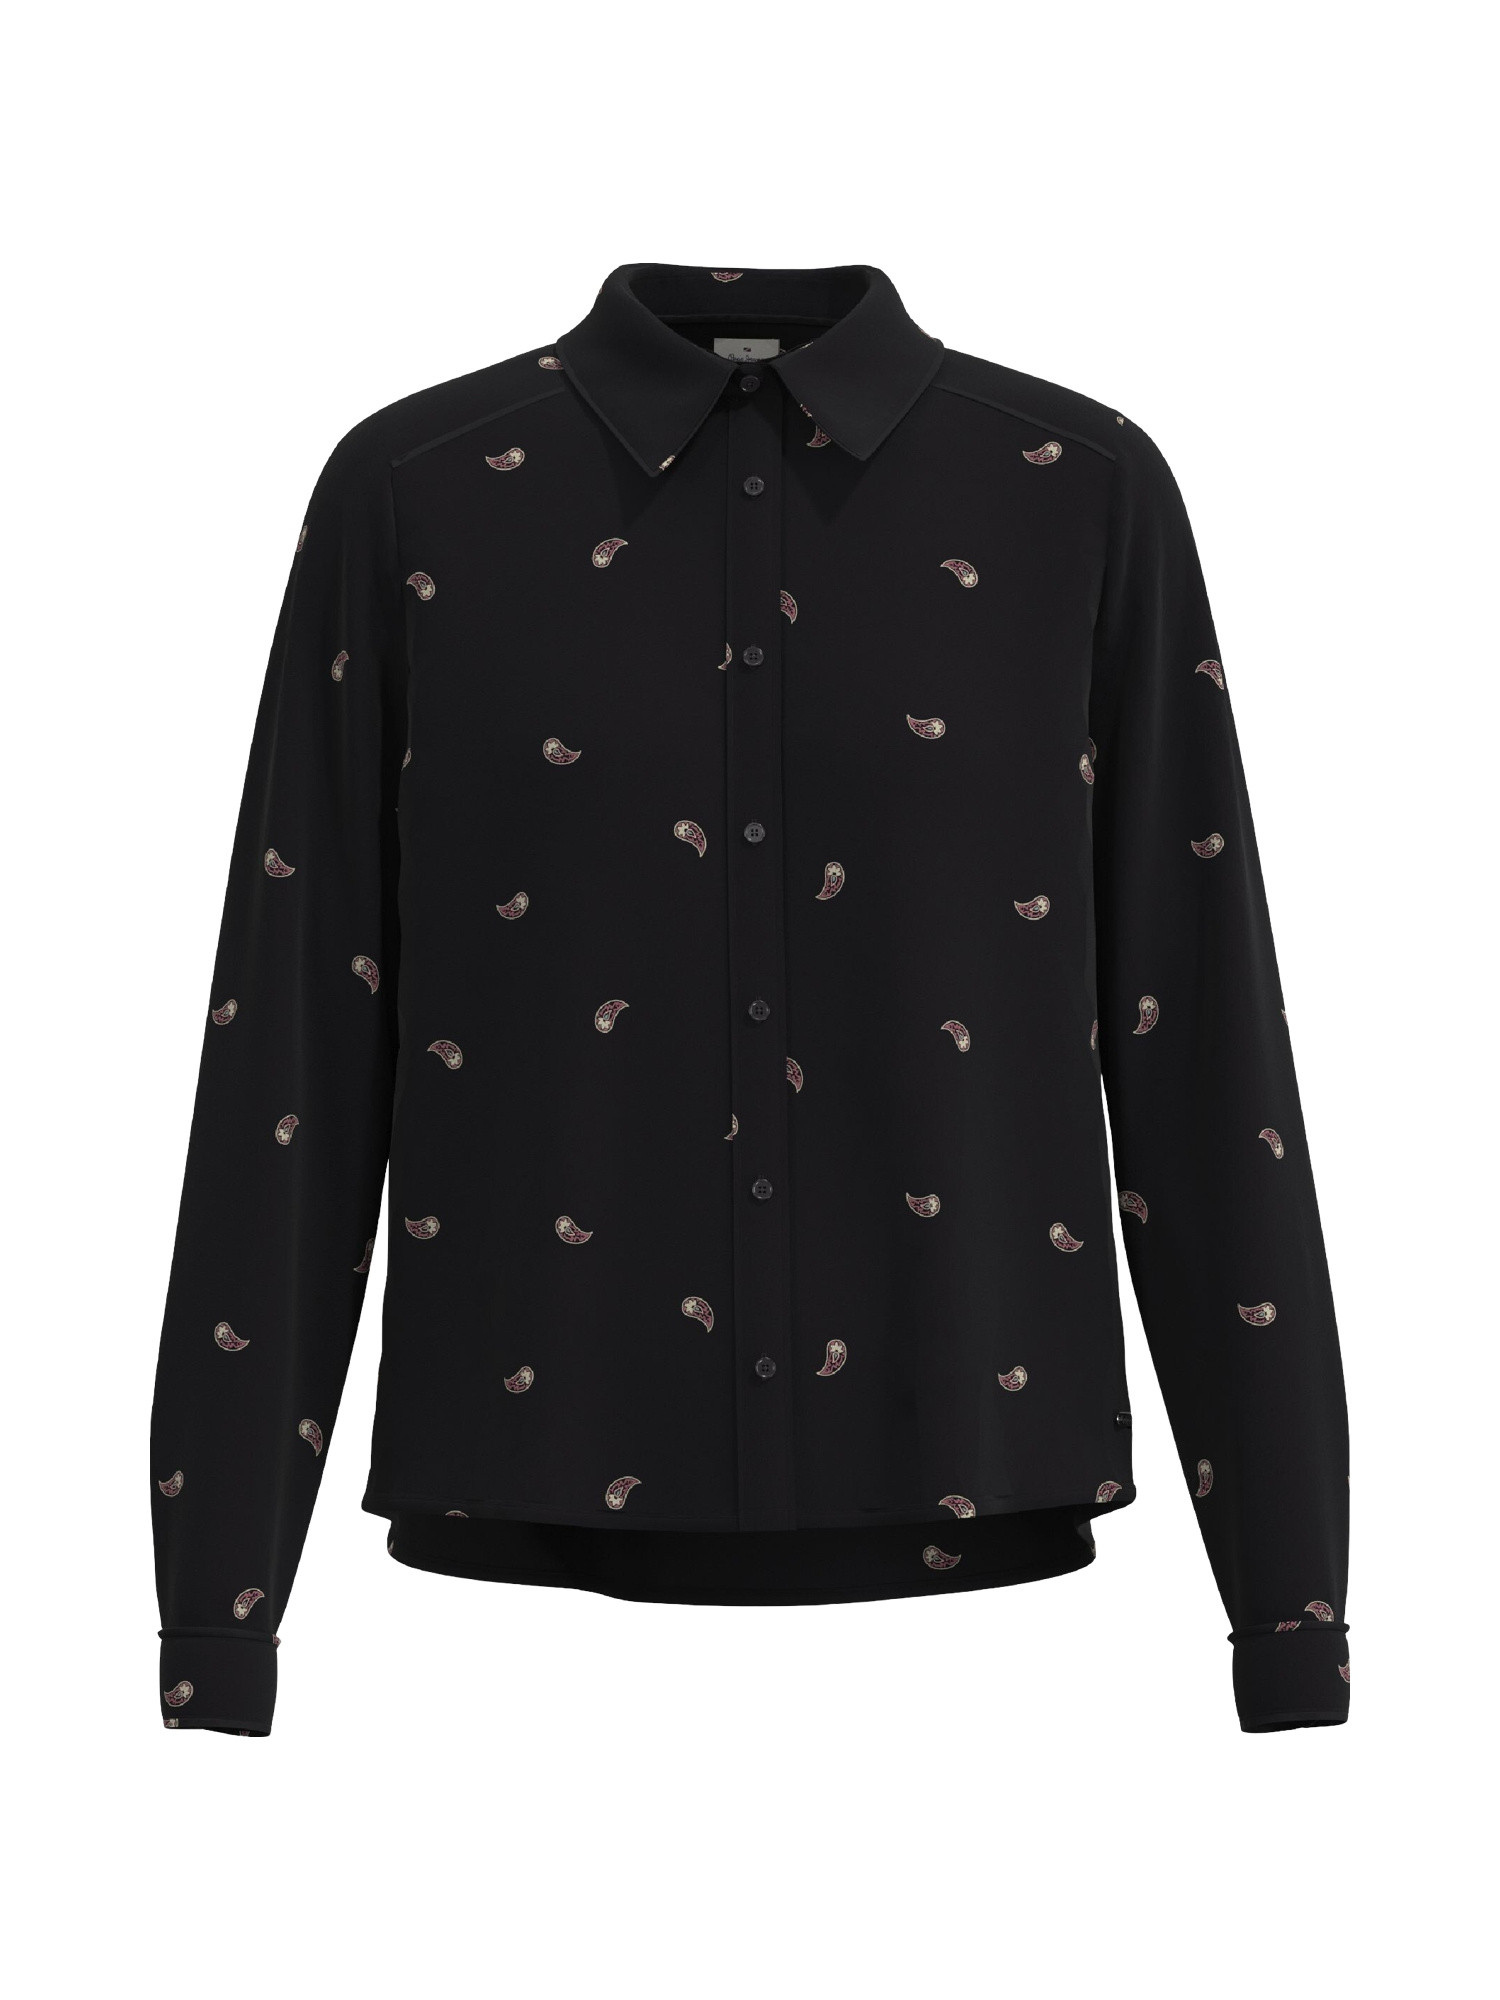 Pepe Jeans - Shirt with print, Black, large image number 0